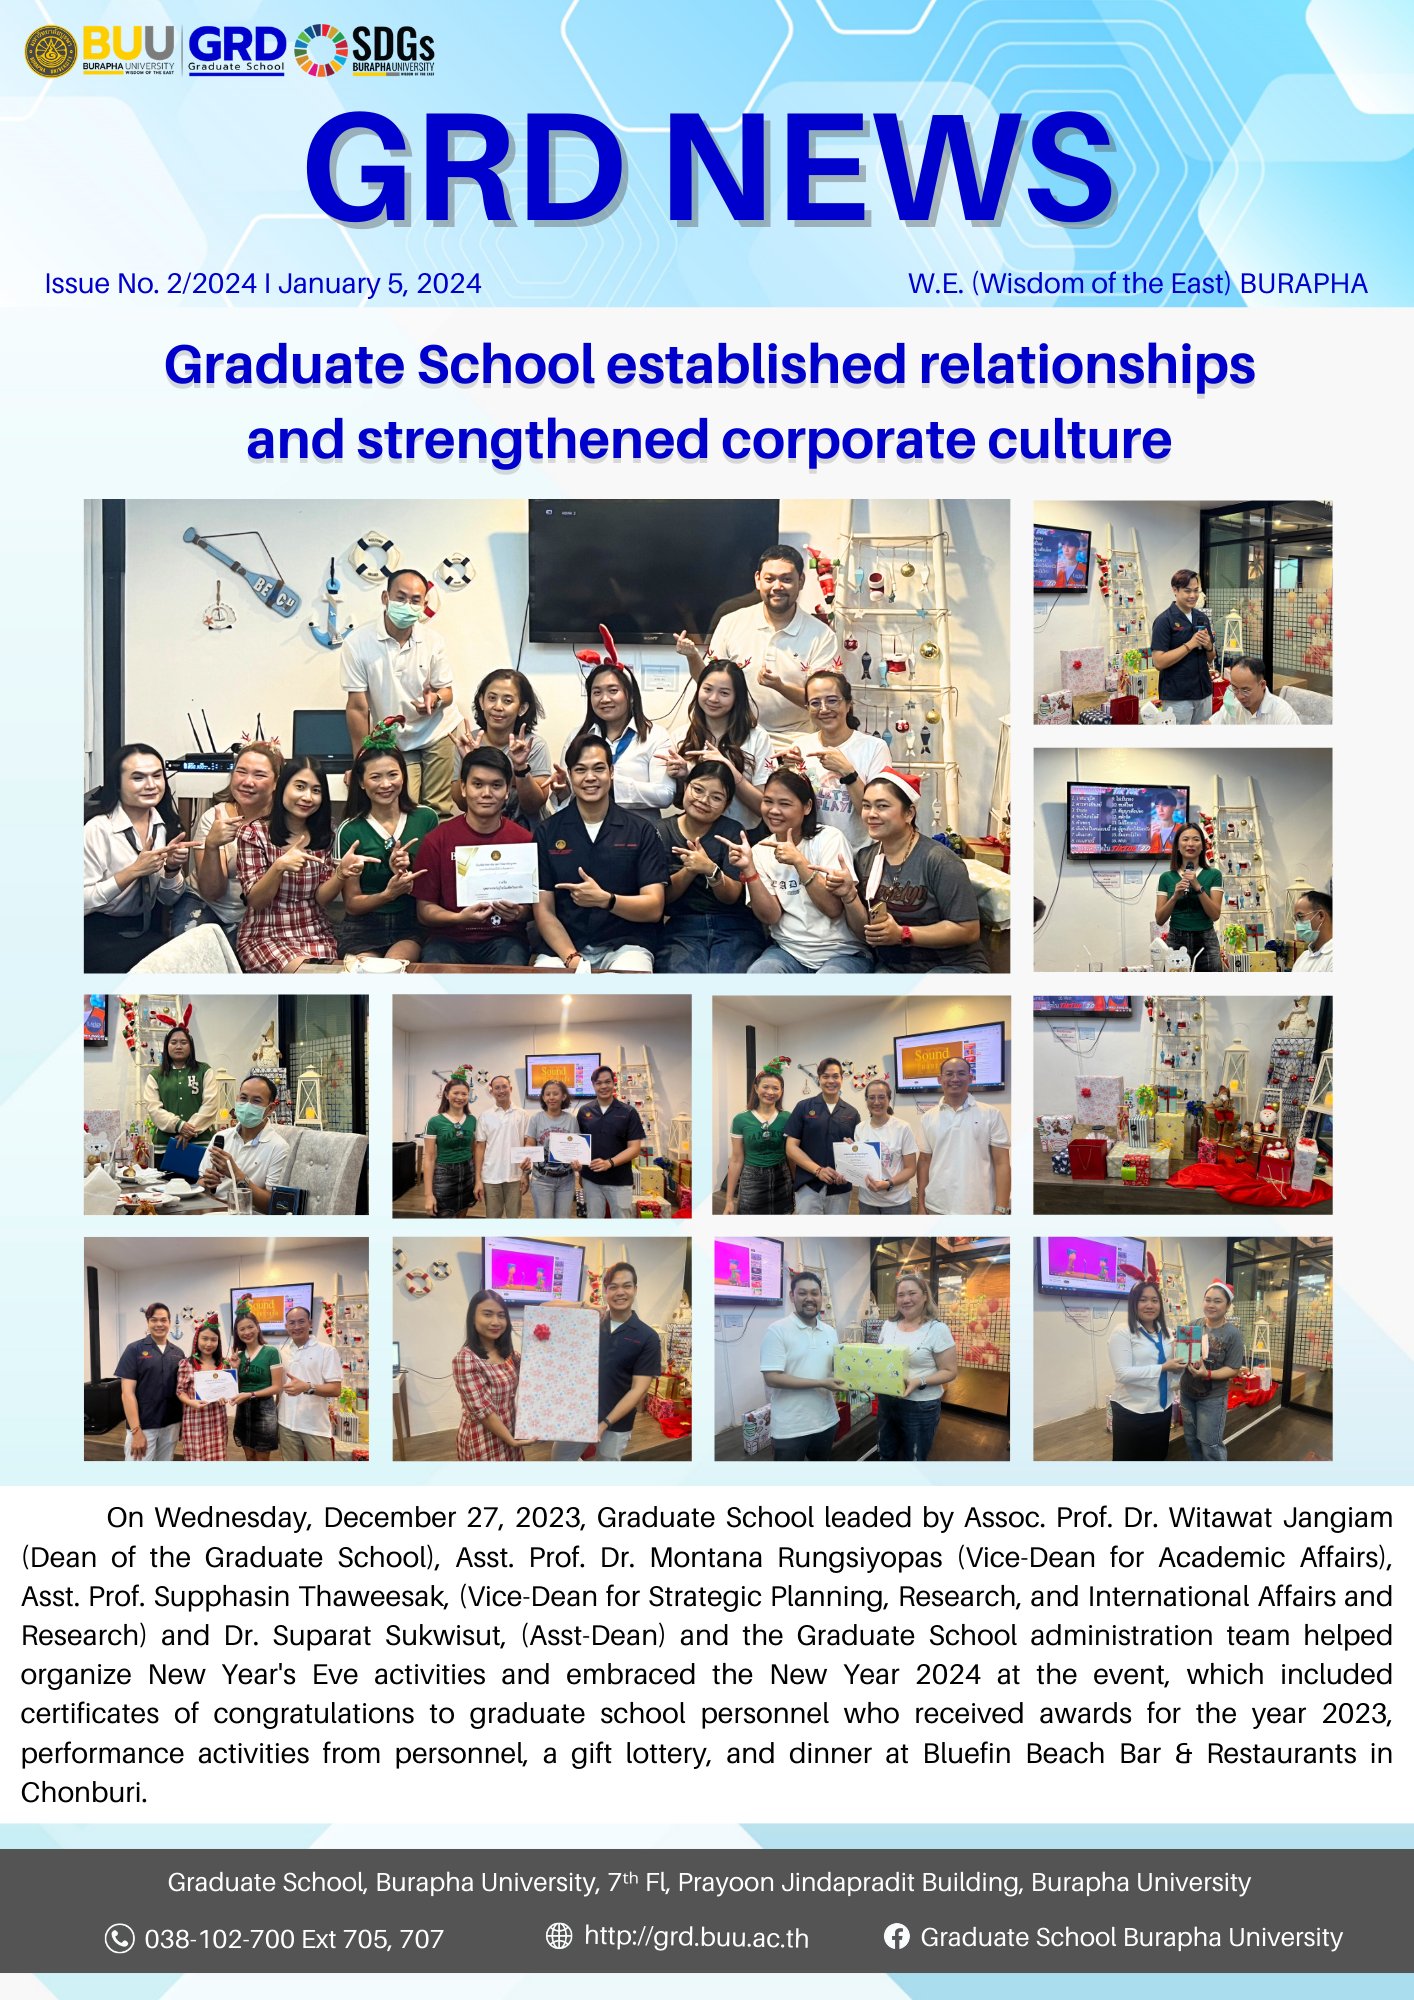 Graduate School established relationships and strengthened corporate culture